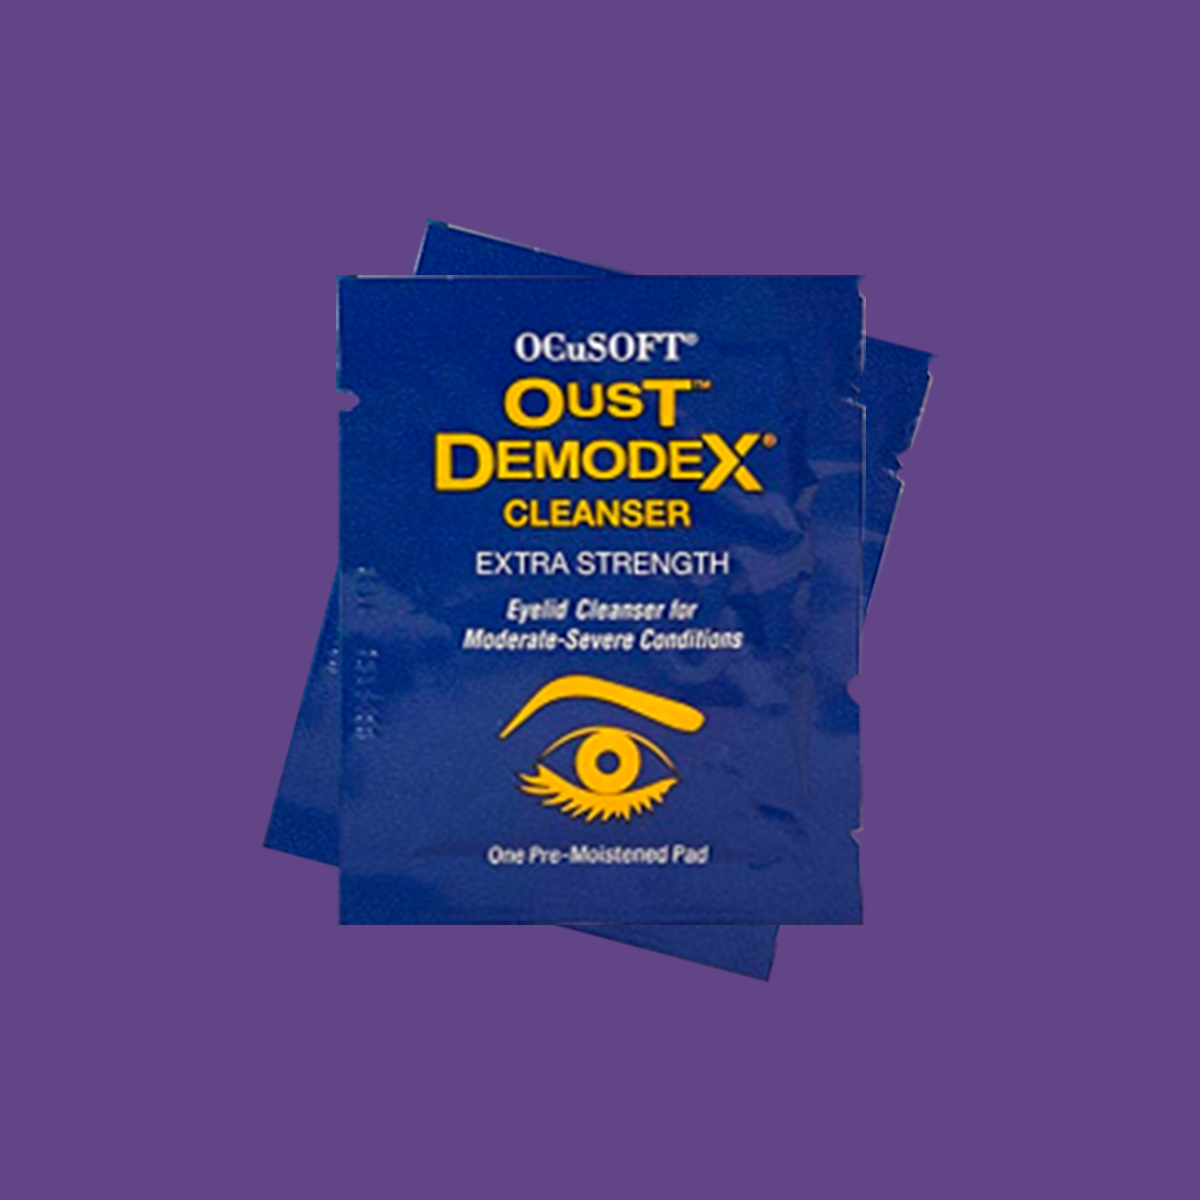 OCuSOFT Oust Demodex Cleanser Pre-Moistened Pads (30ct)